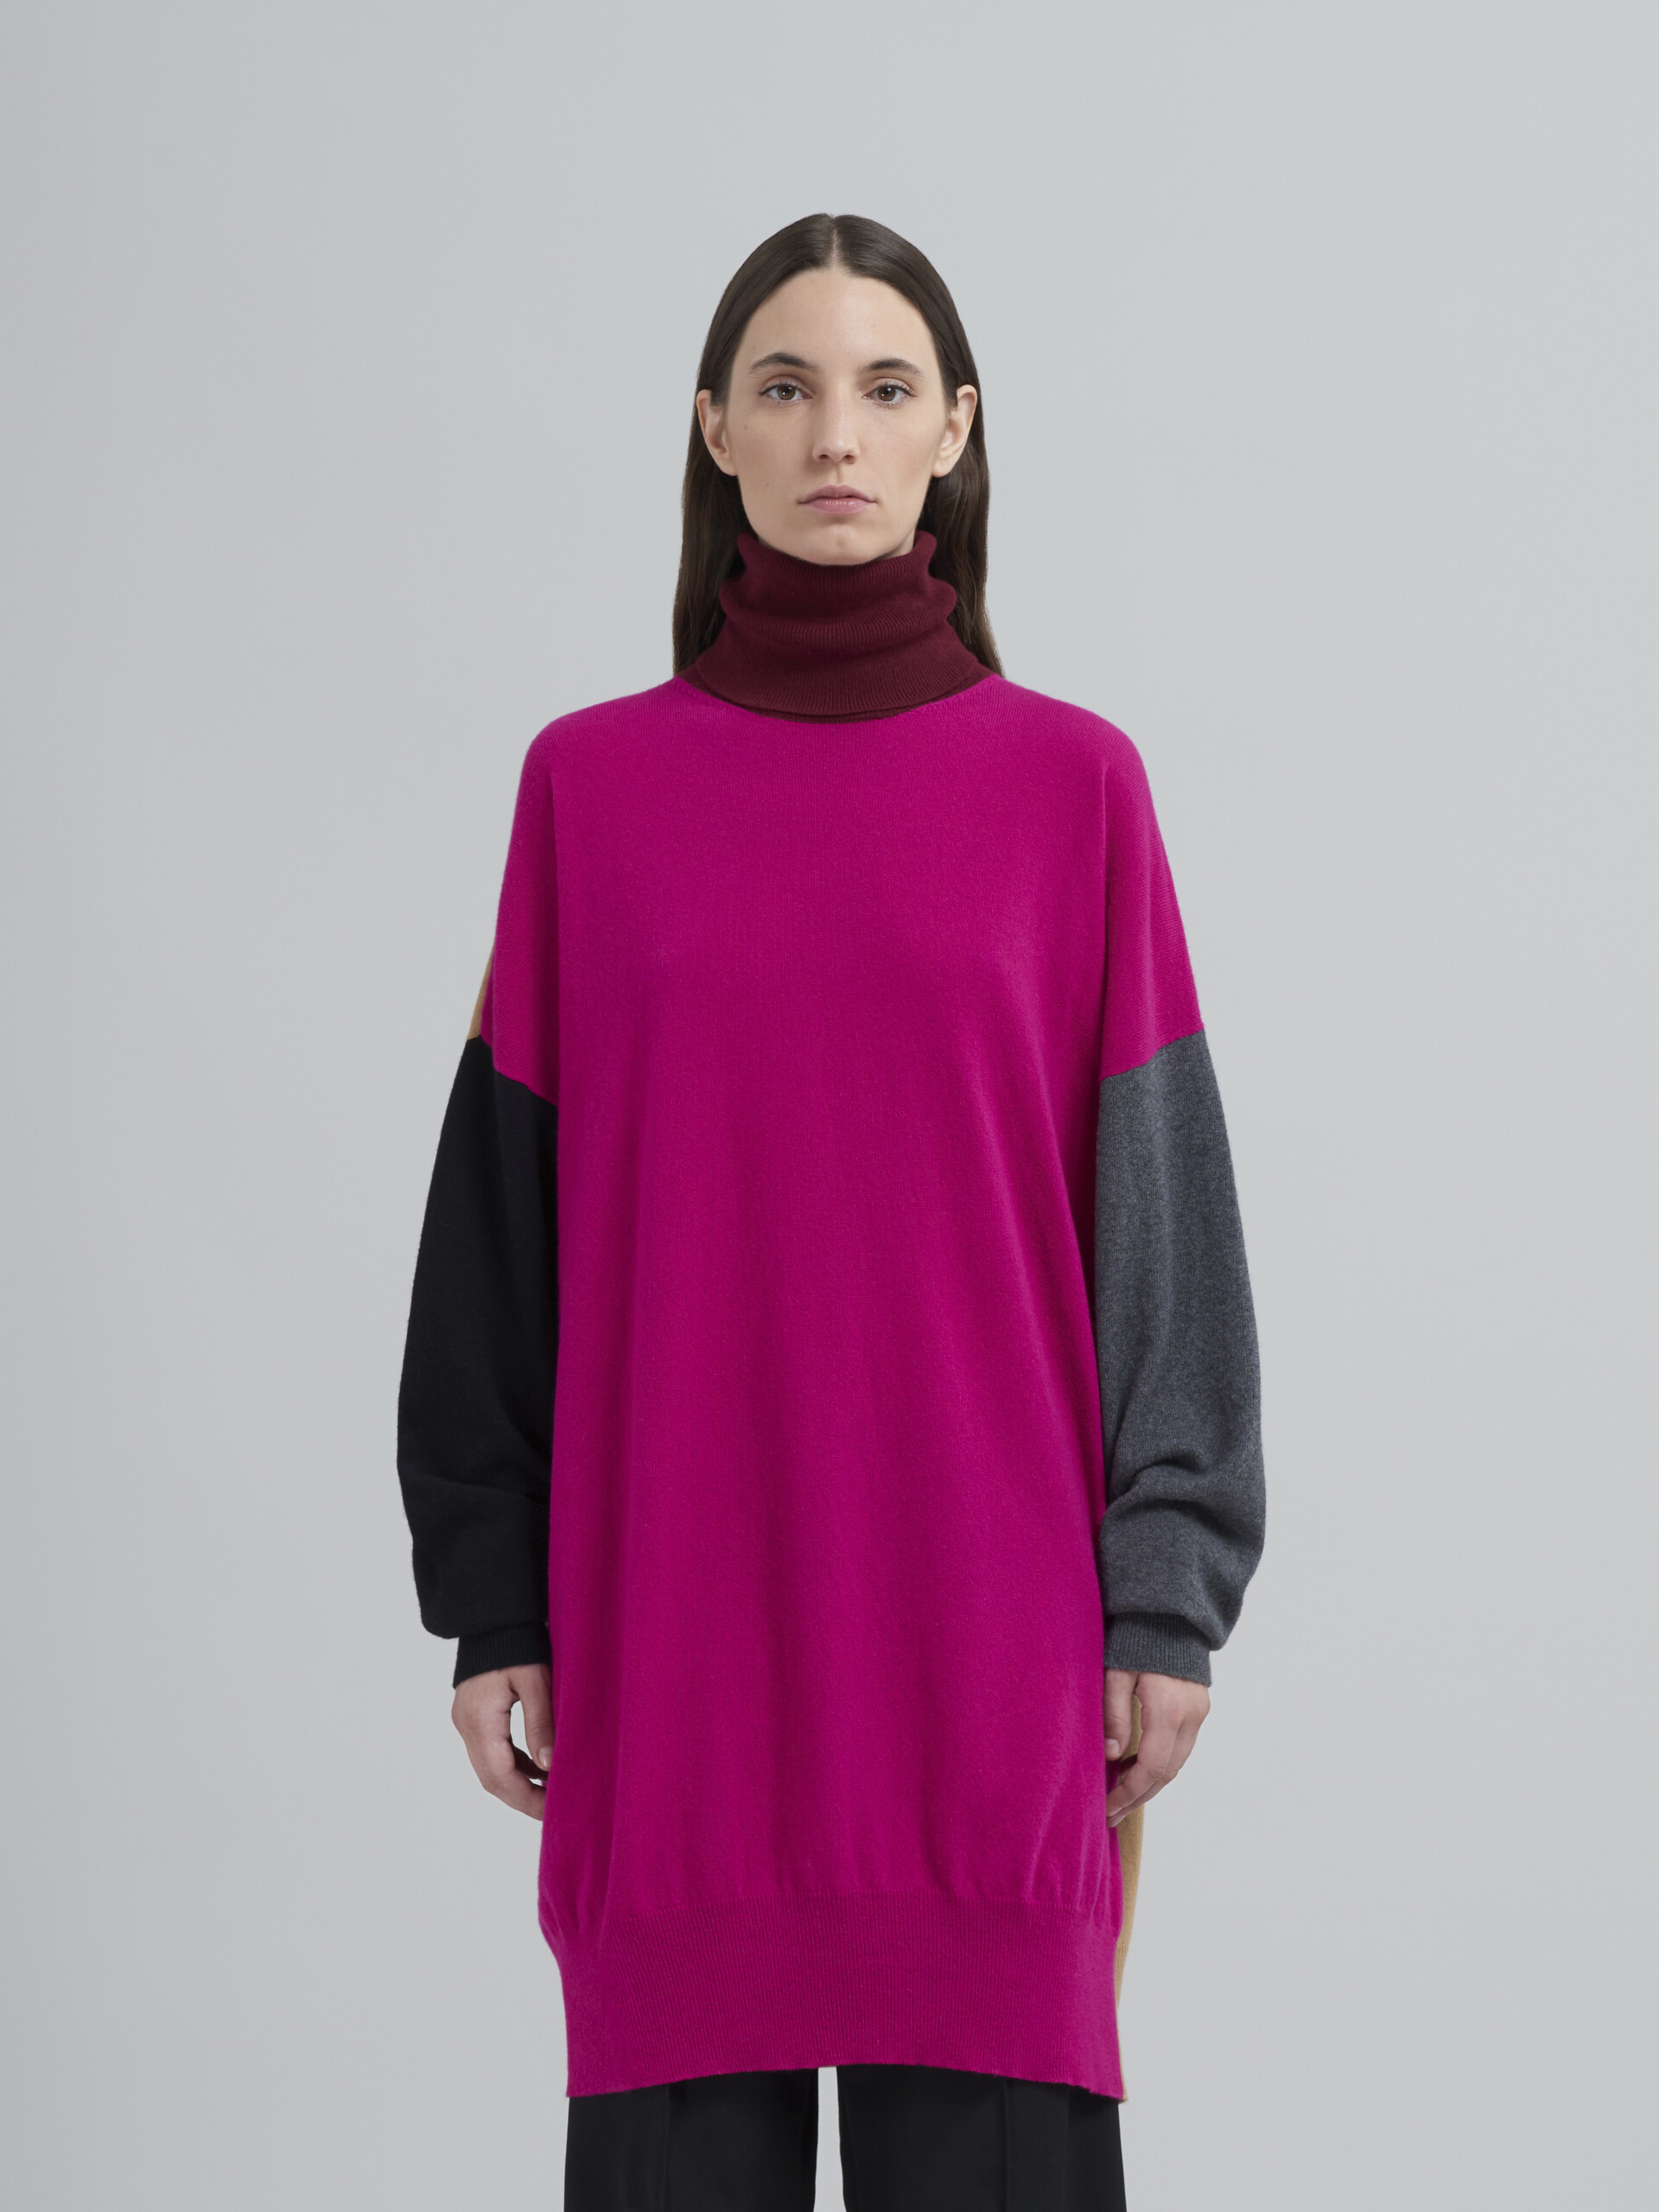 Colourblock wool and cashmere sweater - Pullovers - Image 2